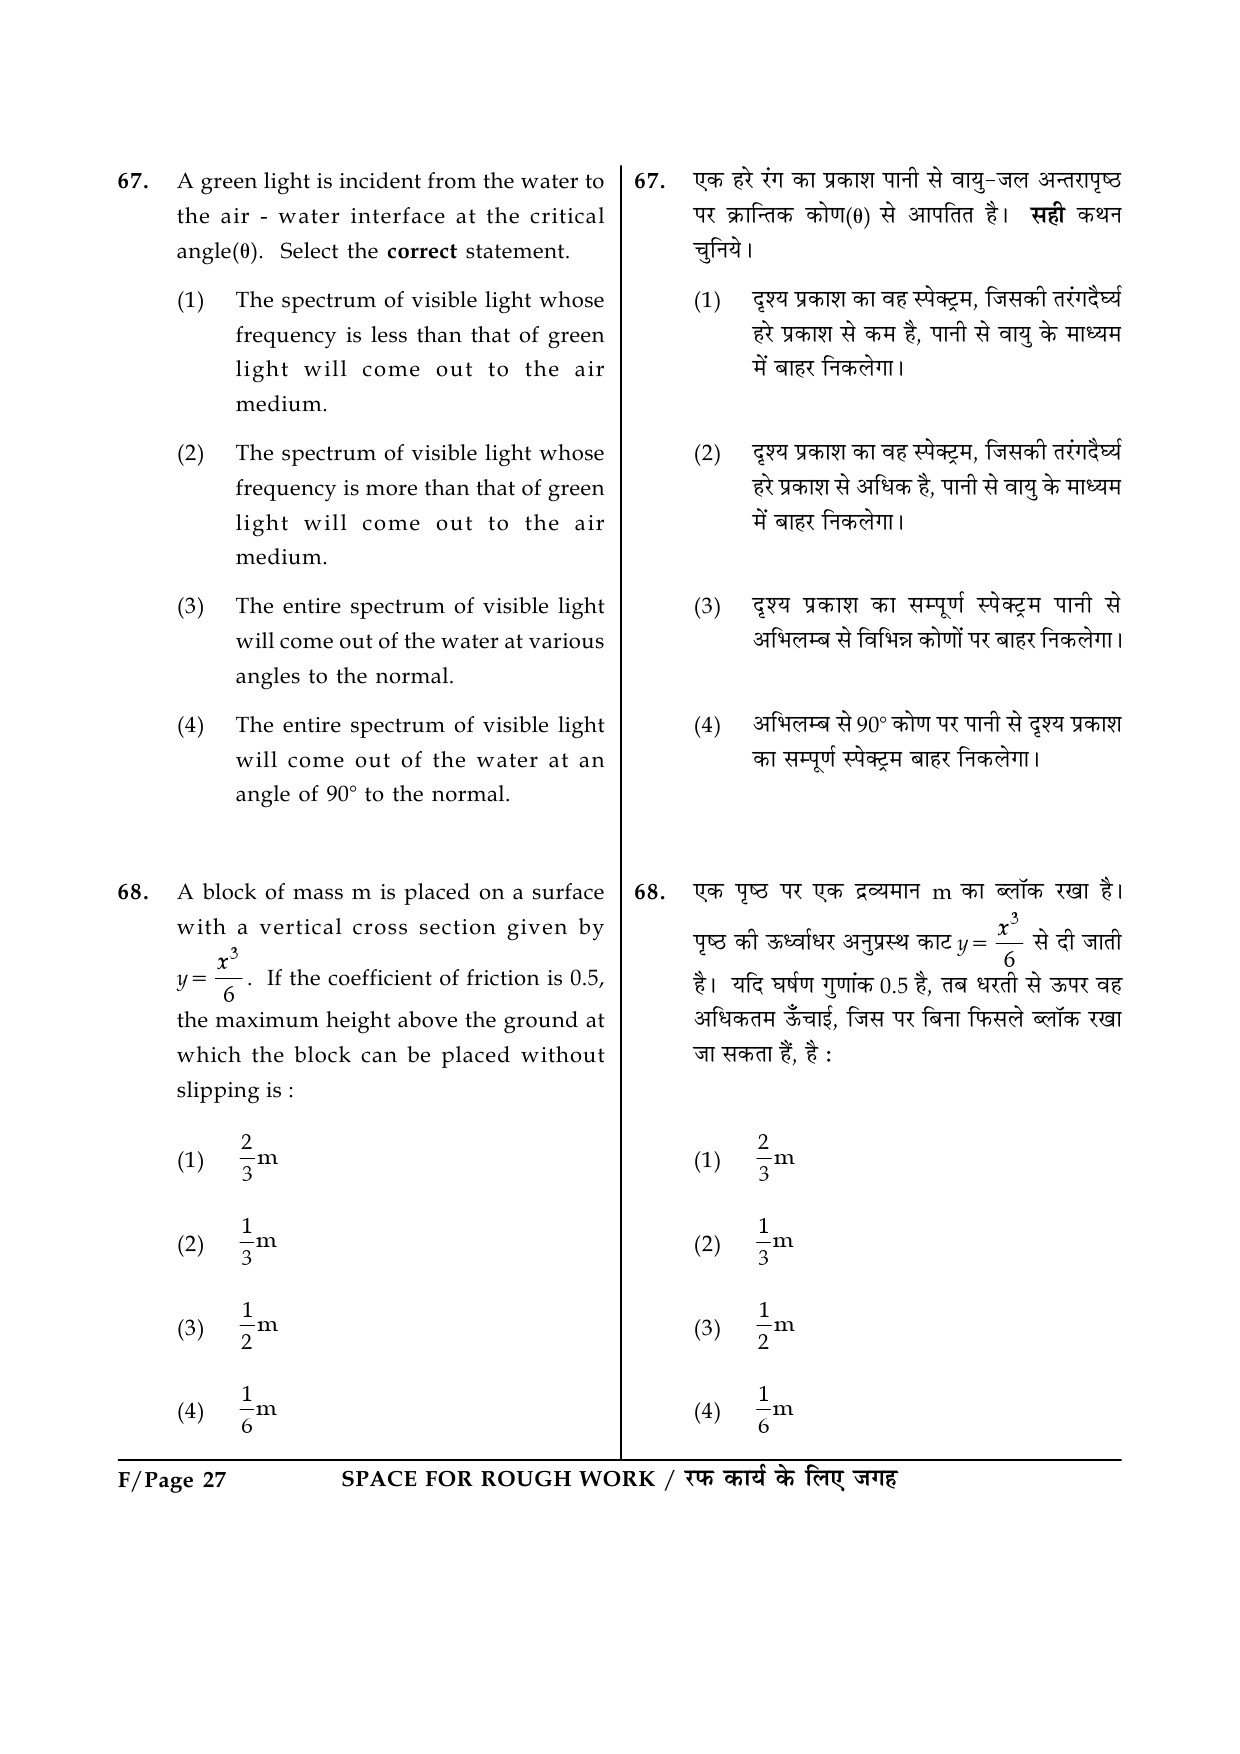 JEE Main Exam Question Paper 2014 Booklet F 27